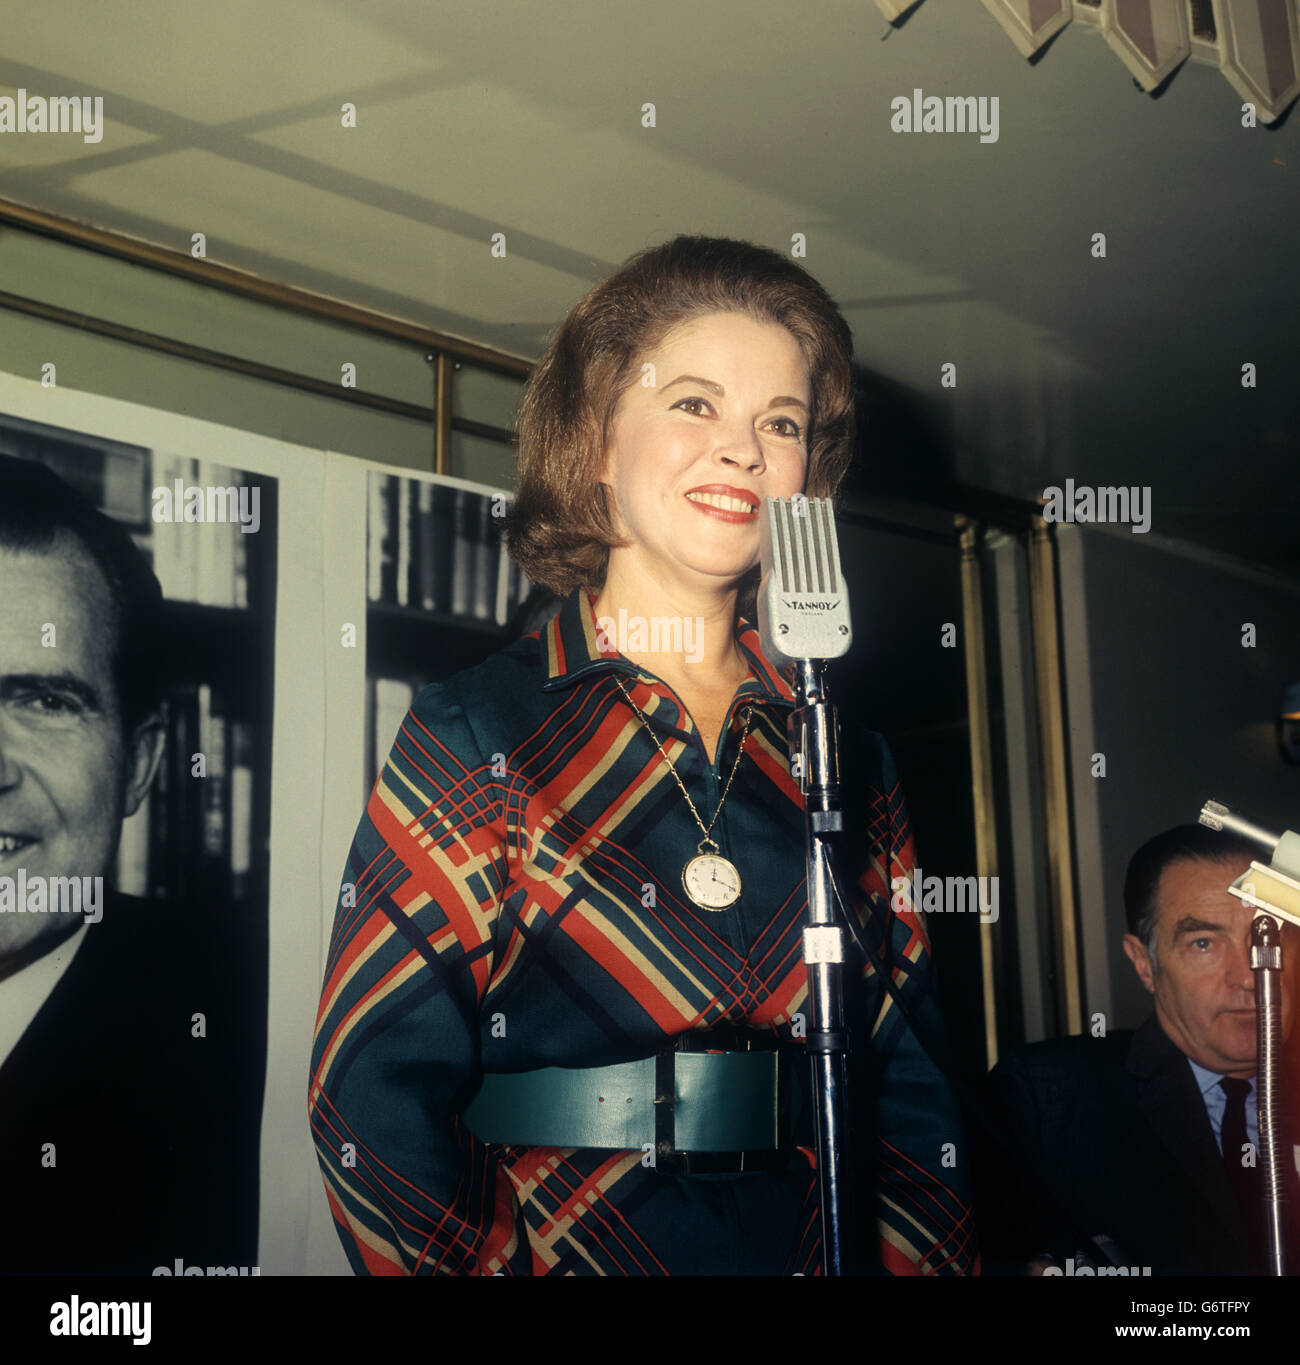 Politics - Republican National Committee Speaking Tour - Shirley Temple - Cafe Royal, London Stock Photo